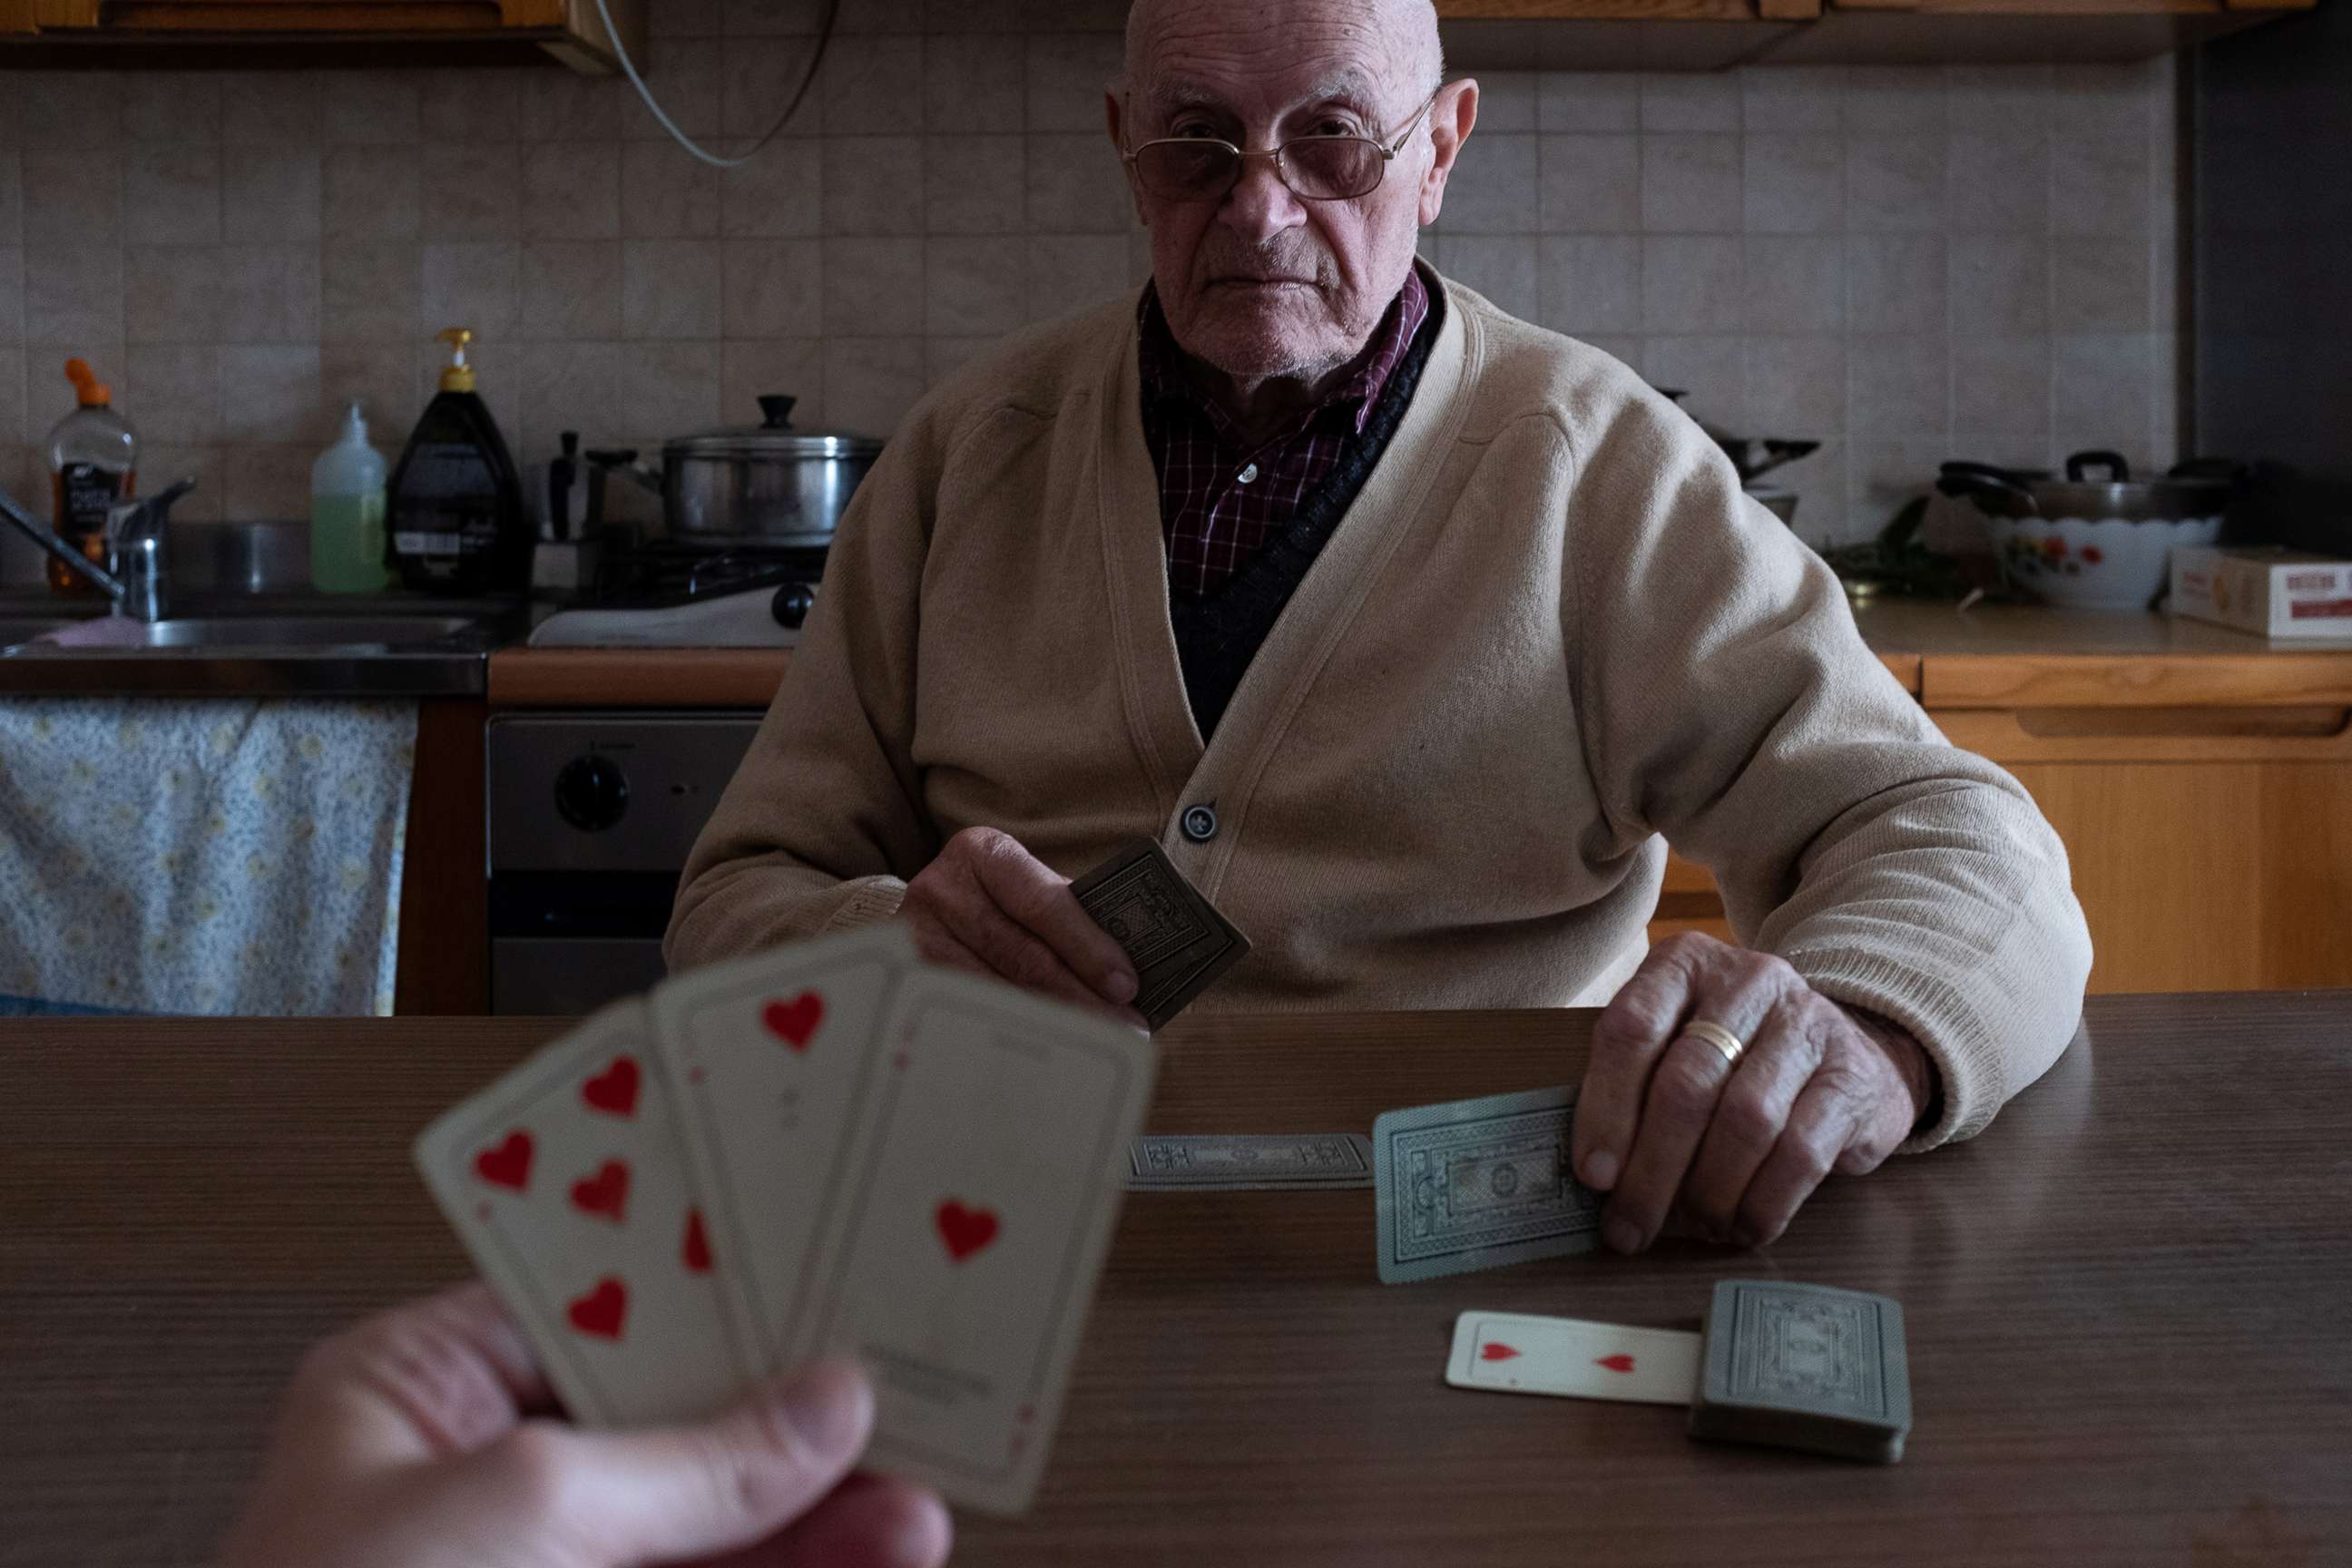 PHOTO: Marzio Toniolo, 35, and his grandfather, Gino Verani, 87, play a game of cards at home, during the coronavirus (COVID-19) outbreak, in San Fiorano, Italy, March 12, 2020.